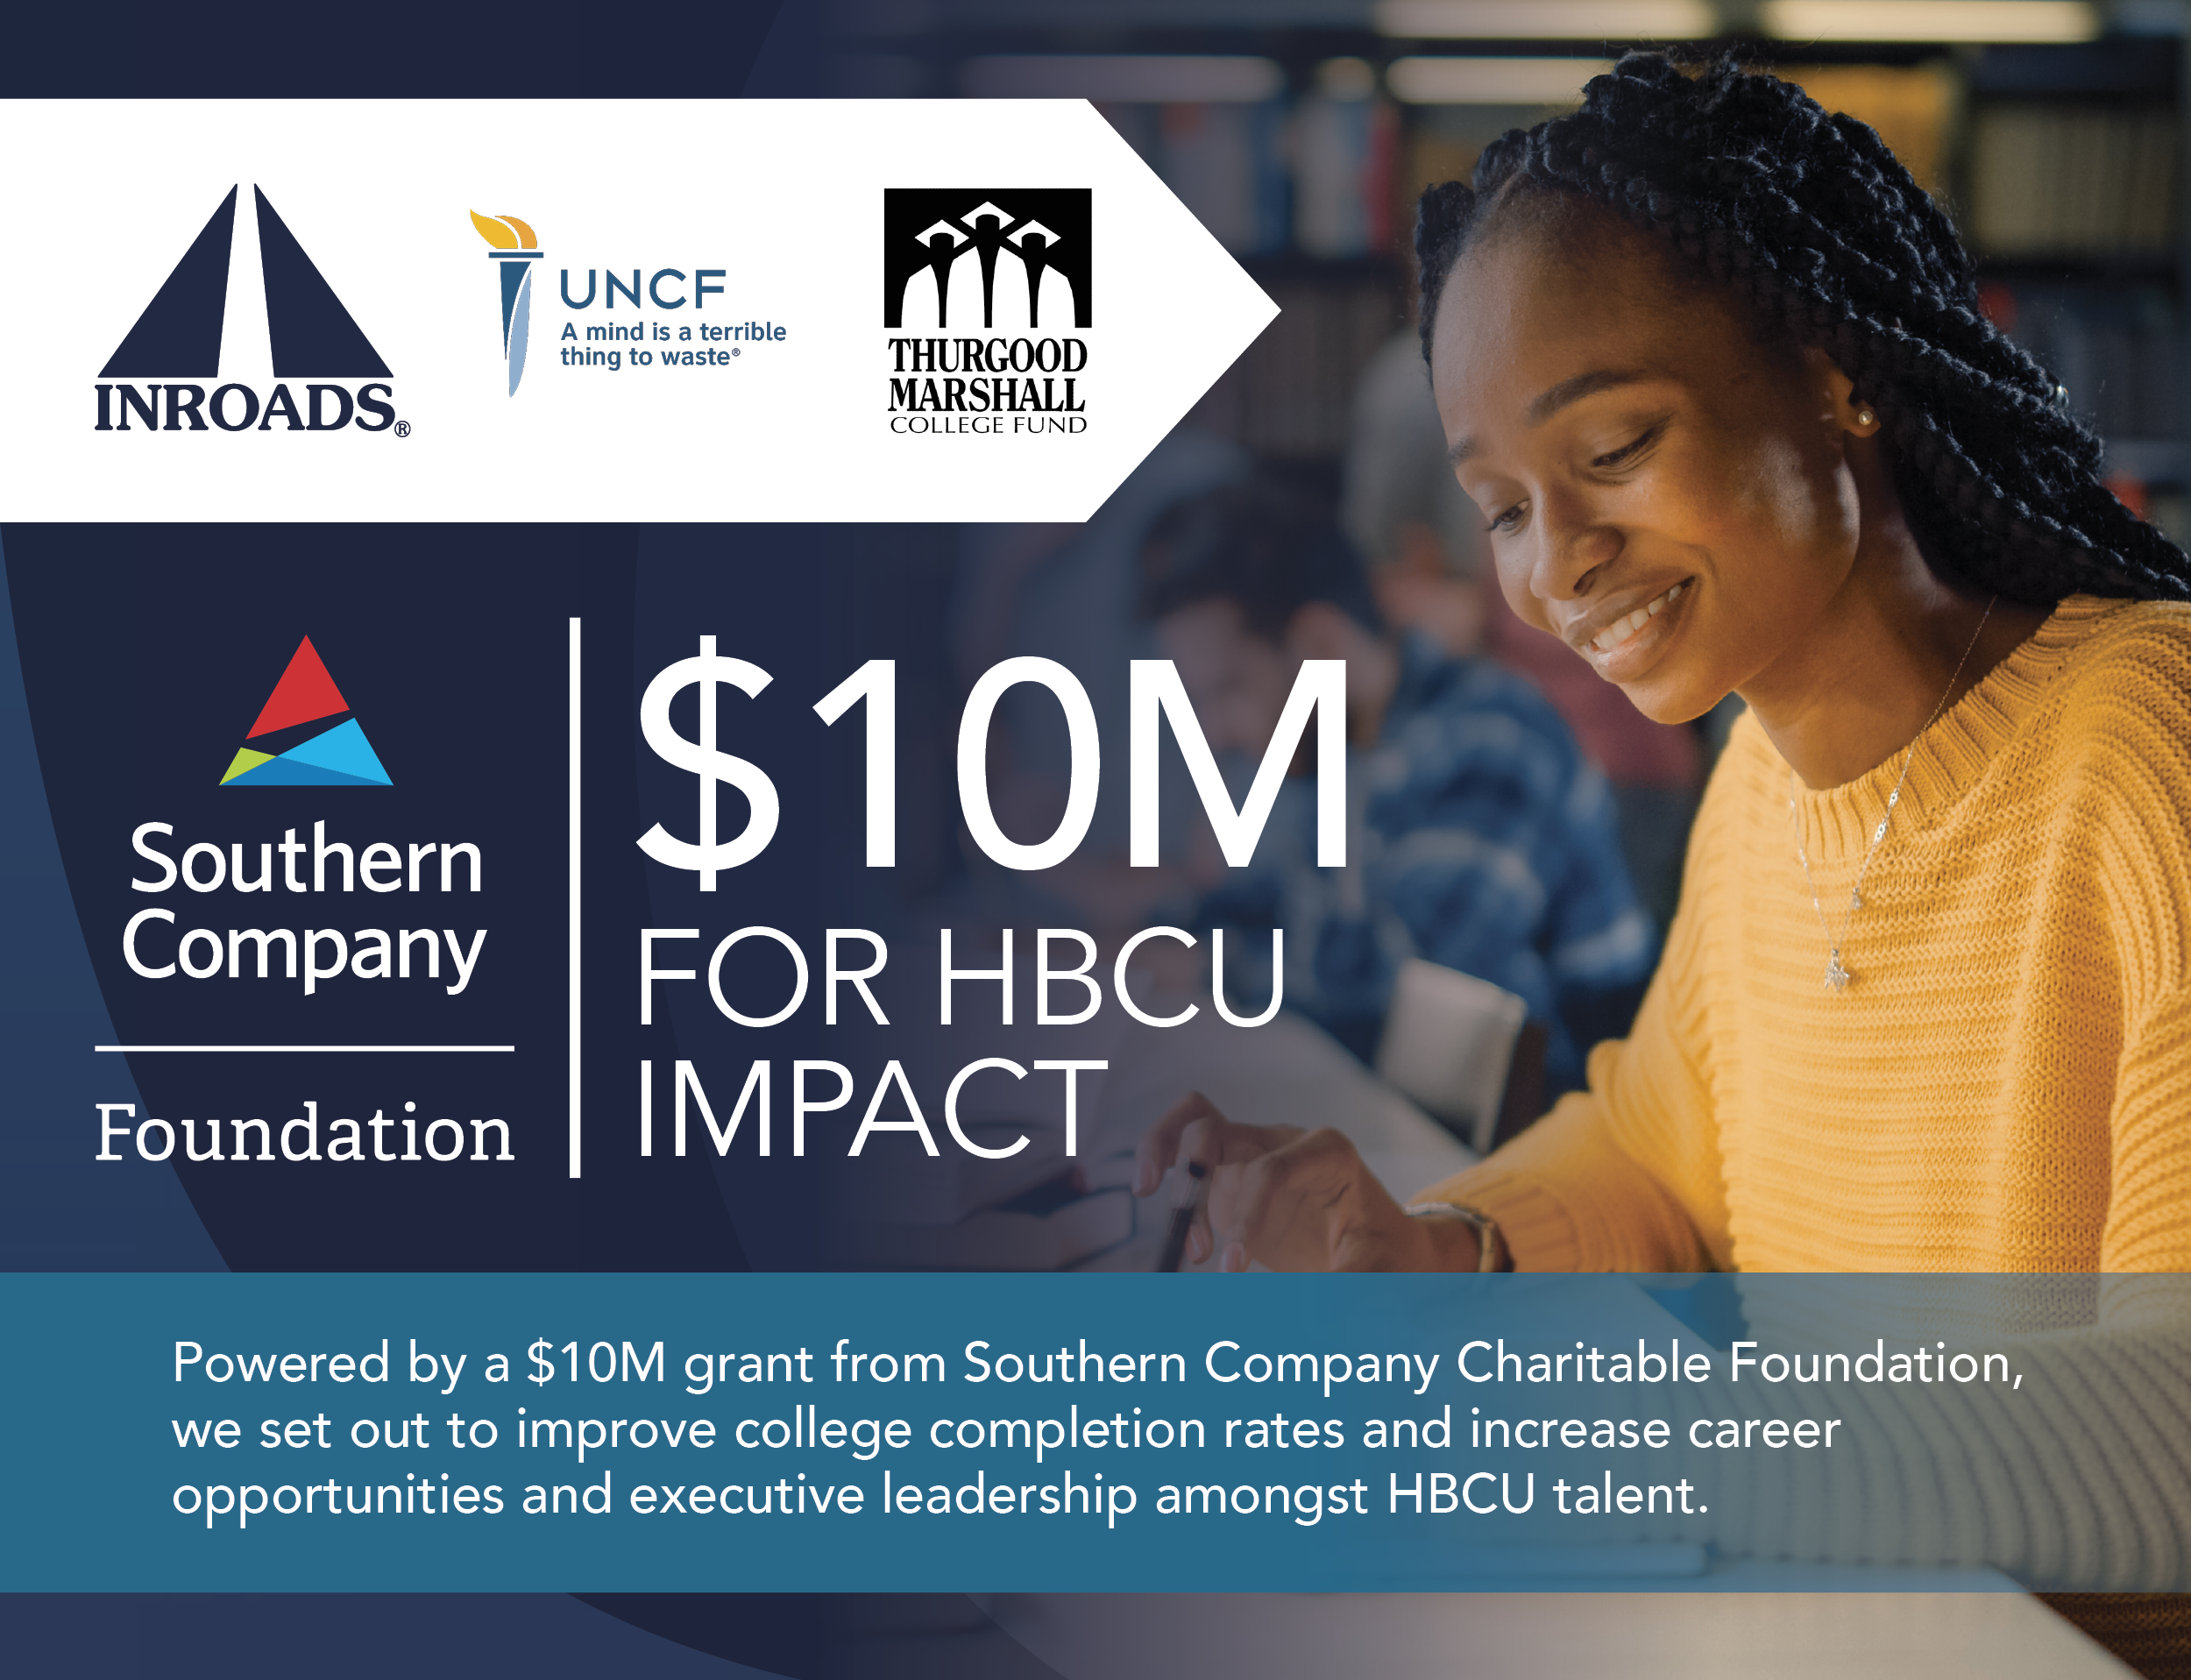 Featured image for “SOUTHERN COMPANY FOUNDATION ISSUES $10 MILLION IN GRANTS TO FOSTER HBCU TALENT THROUGH INNOVATIVE COLLABORATION BETWEEN INROADS, UNCF AND THURGOOD MARSHALL COLLEGE FUND”